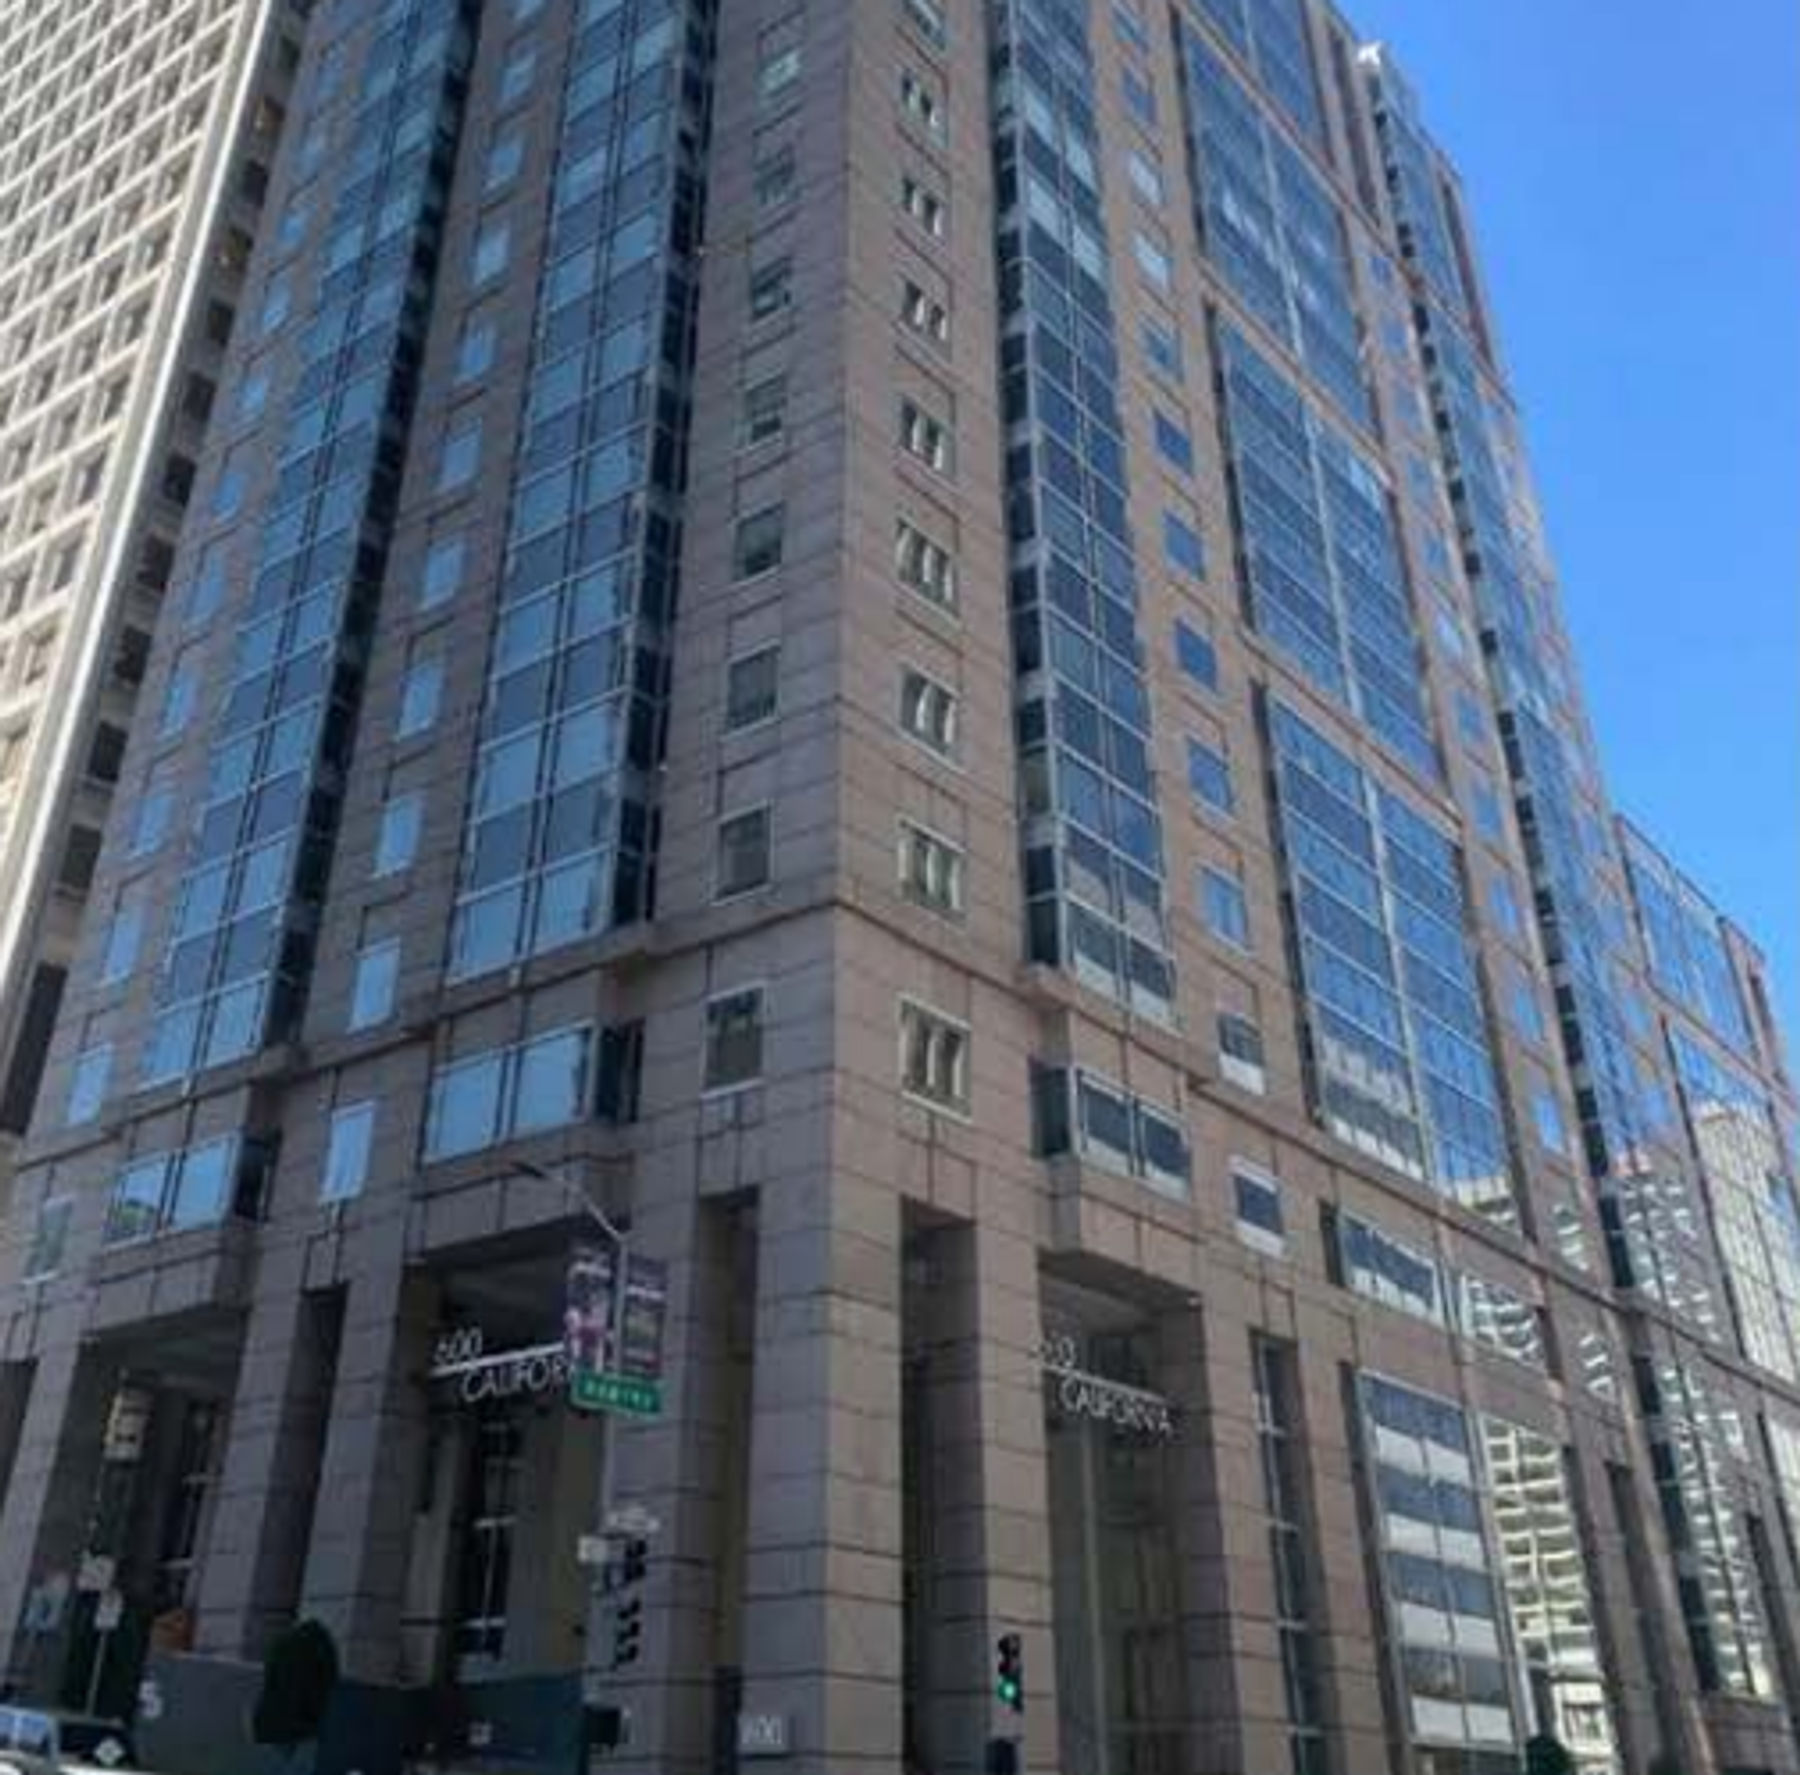 California St Ground Floor Retail - 3 Suites Available | Downtown San Francisco